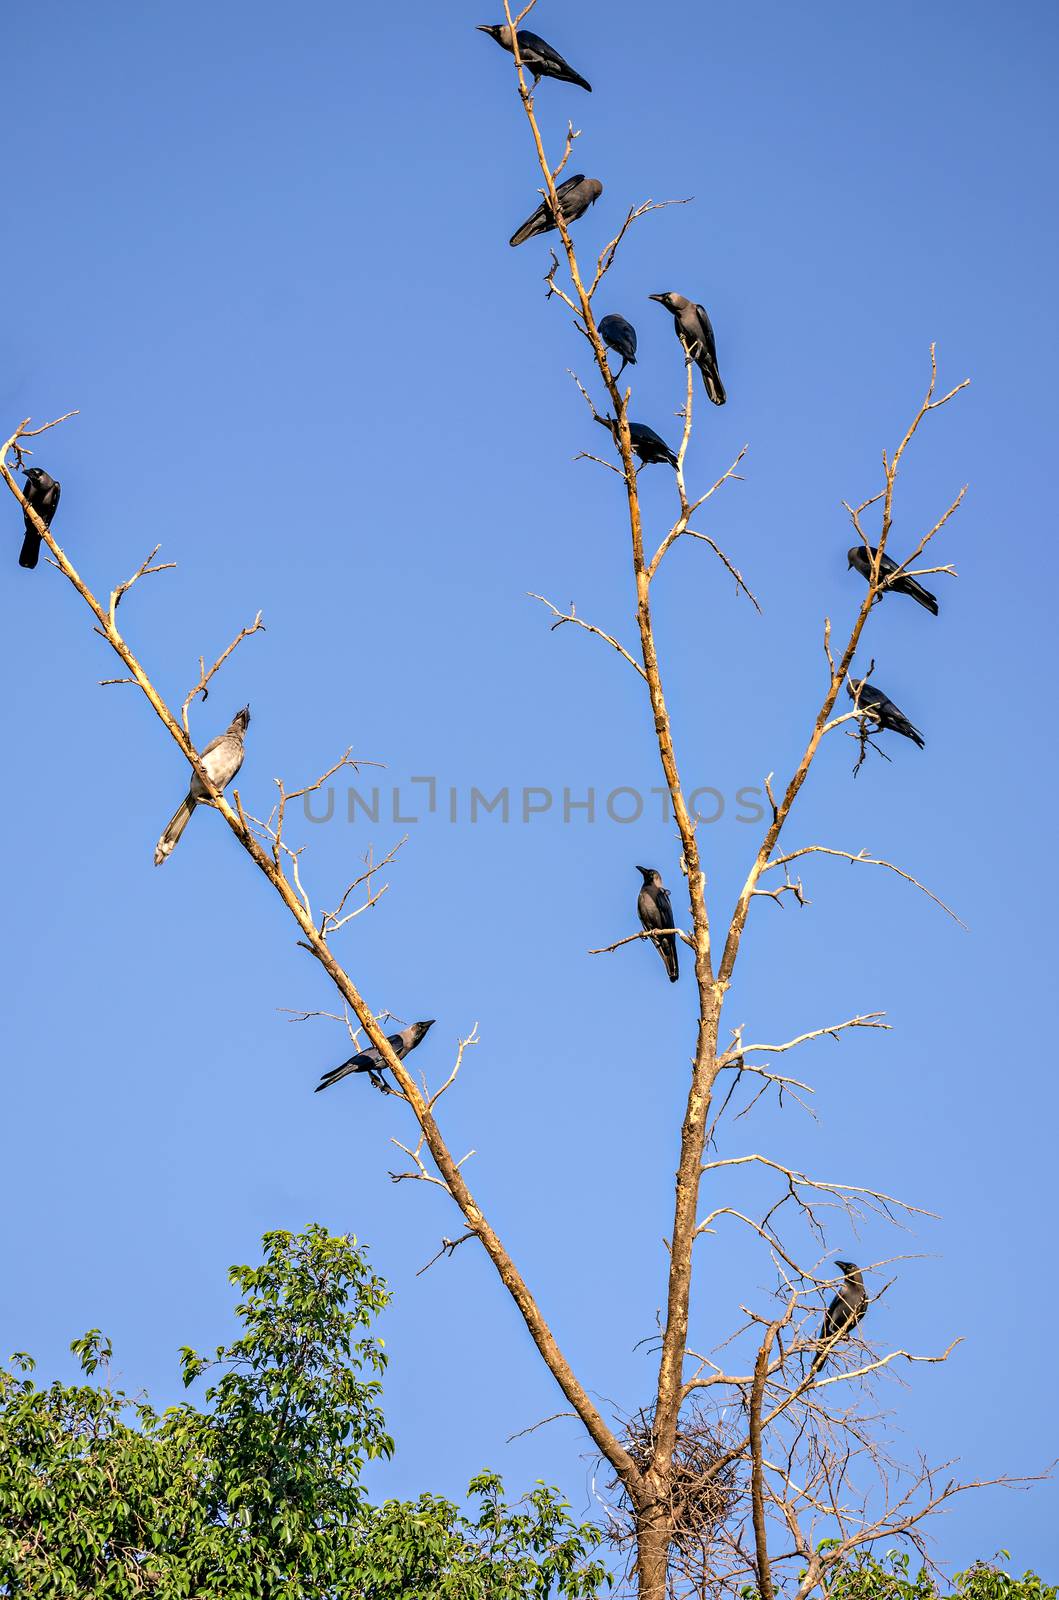 Number of Crows on a dry tree, protecting their nest from a Coppersmith barbet bird.